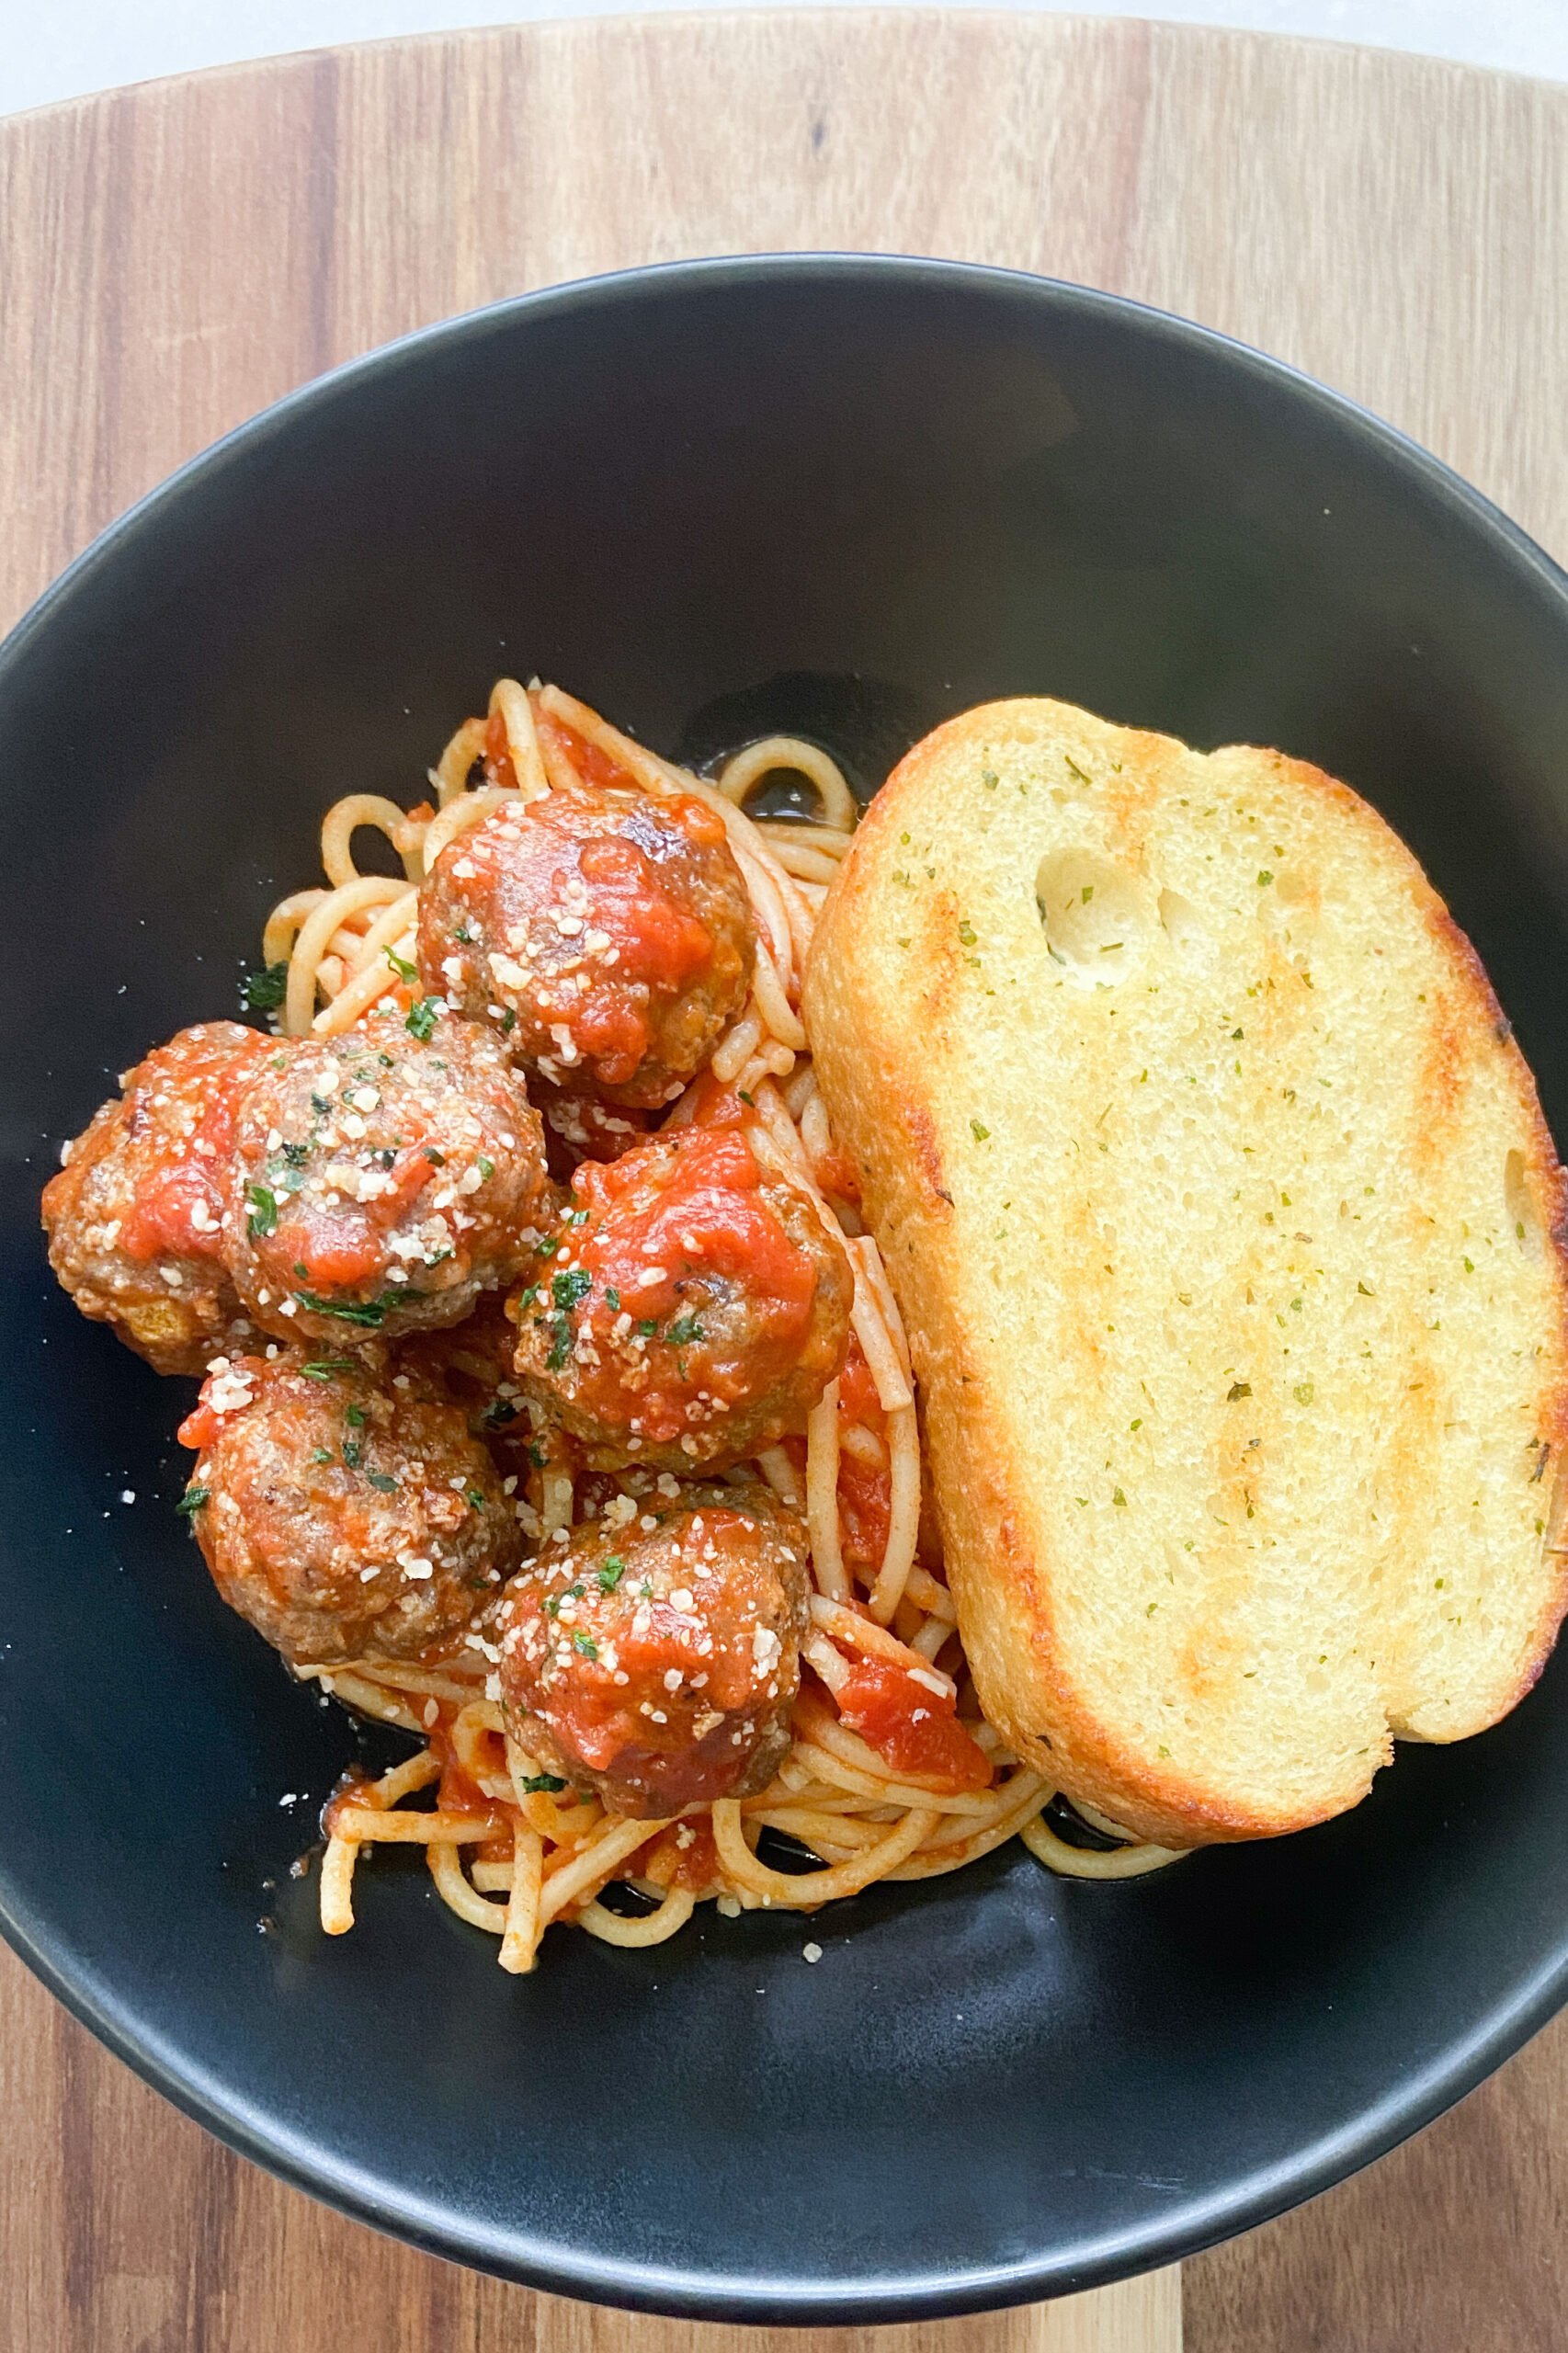 Meatballs served with spaghetti and garlic bread.